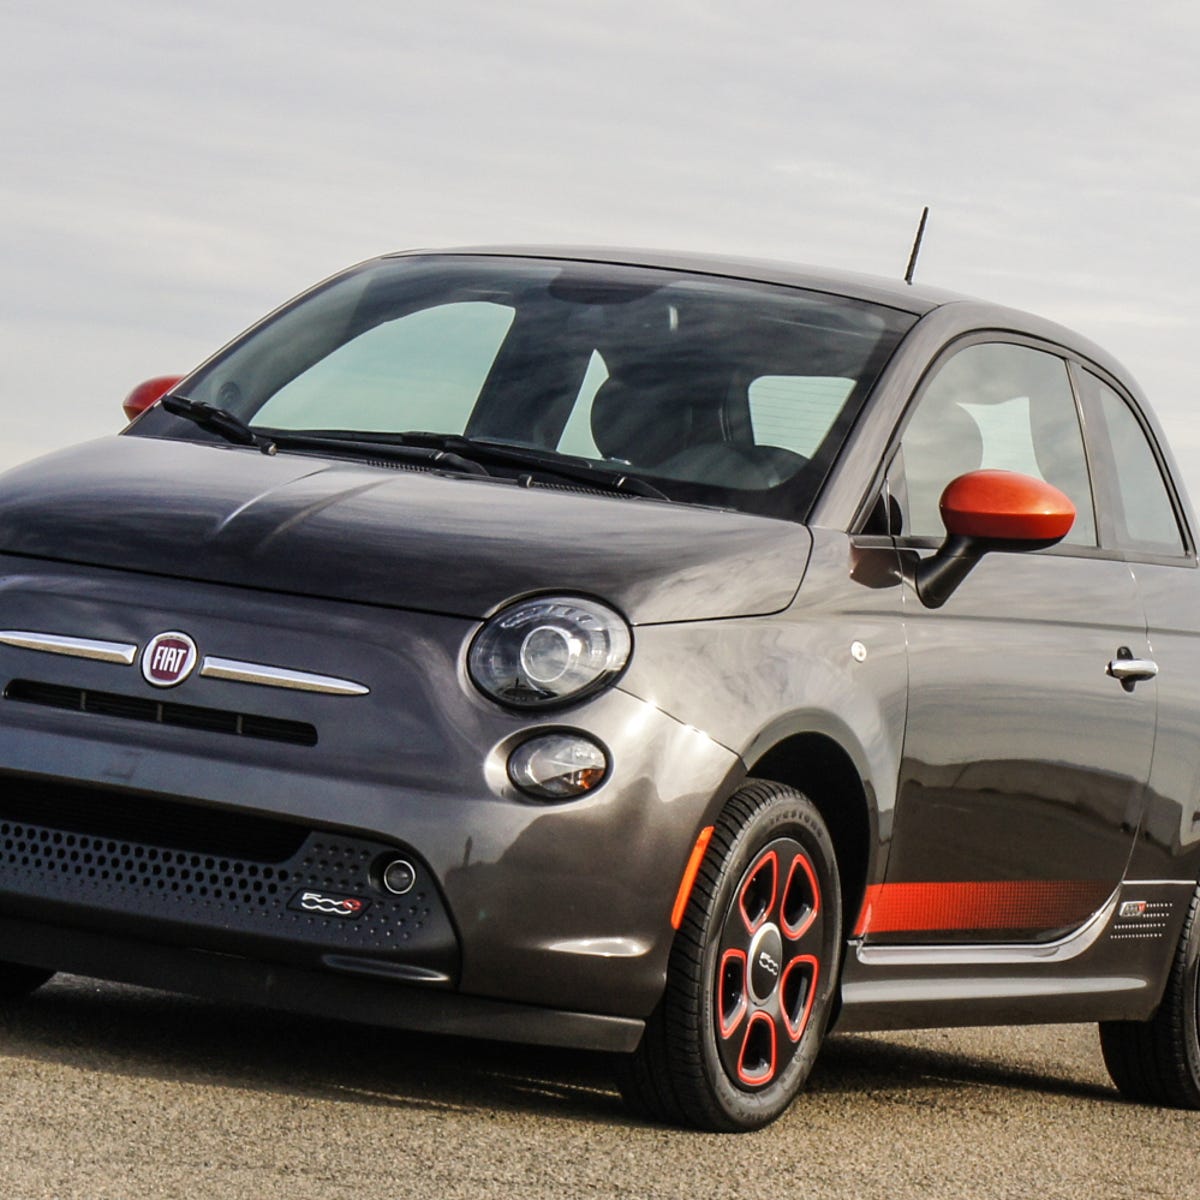 2015 Fiat 500e review: The 2015 Fiat 500e gives eco-chic some Italian flair  - CNET